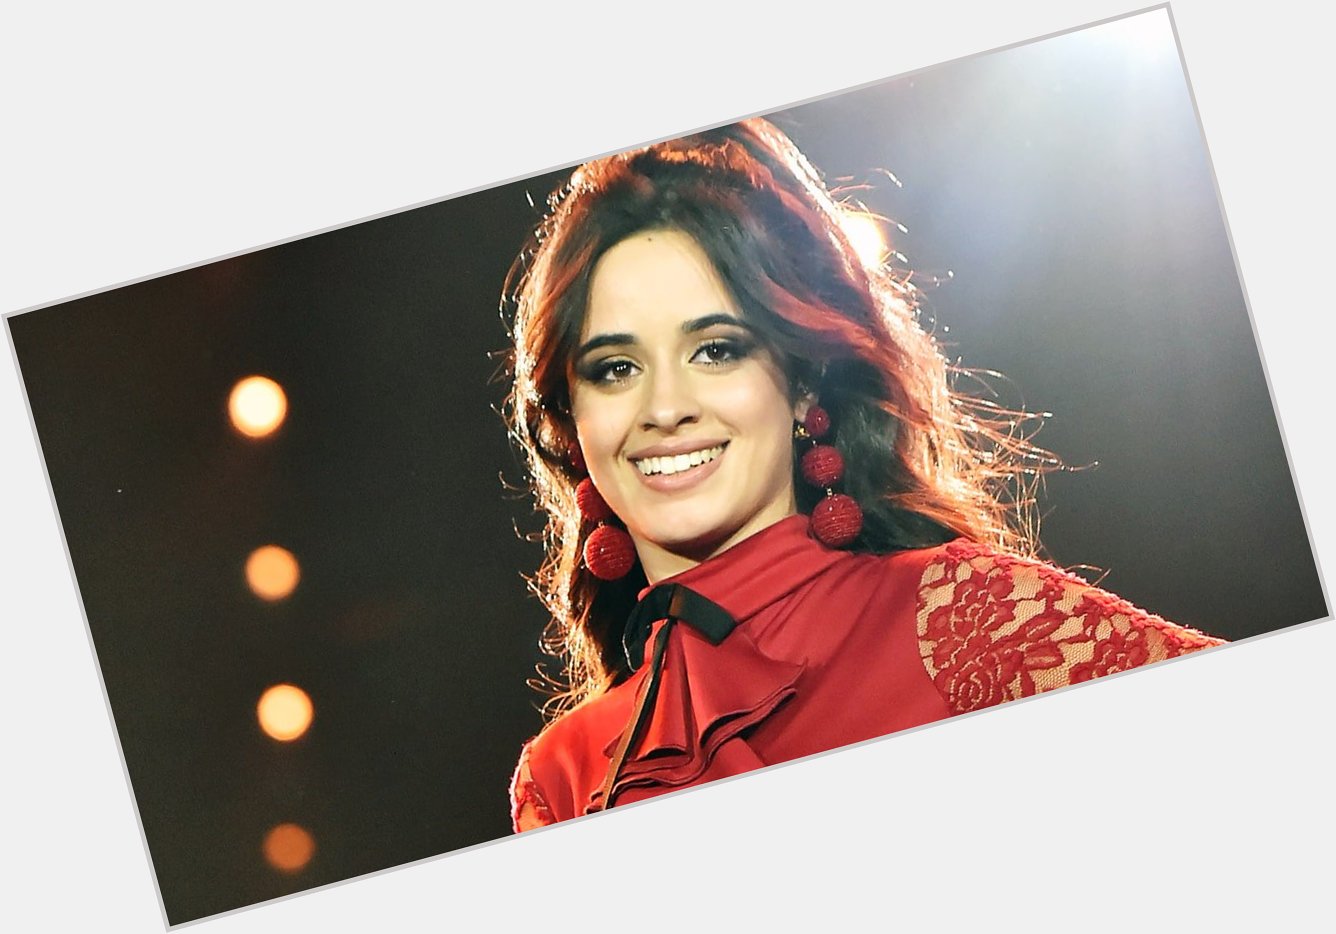 Happy birthday Camila Cabello! Check out our recent feature on the singer  